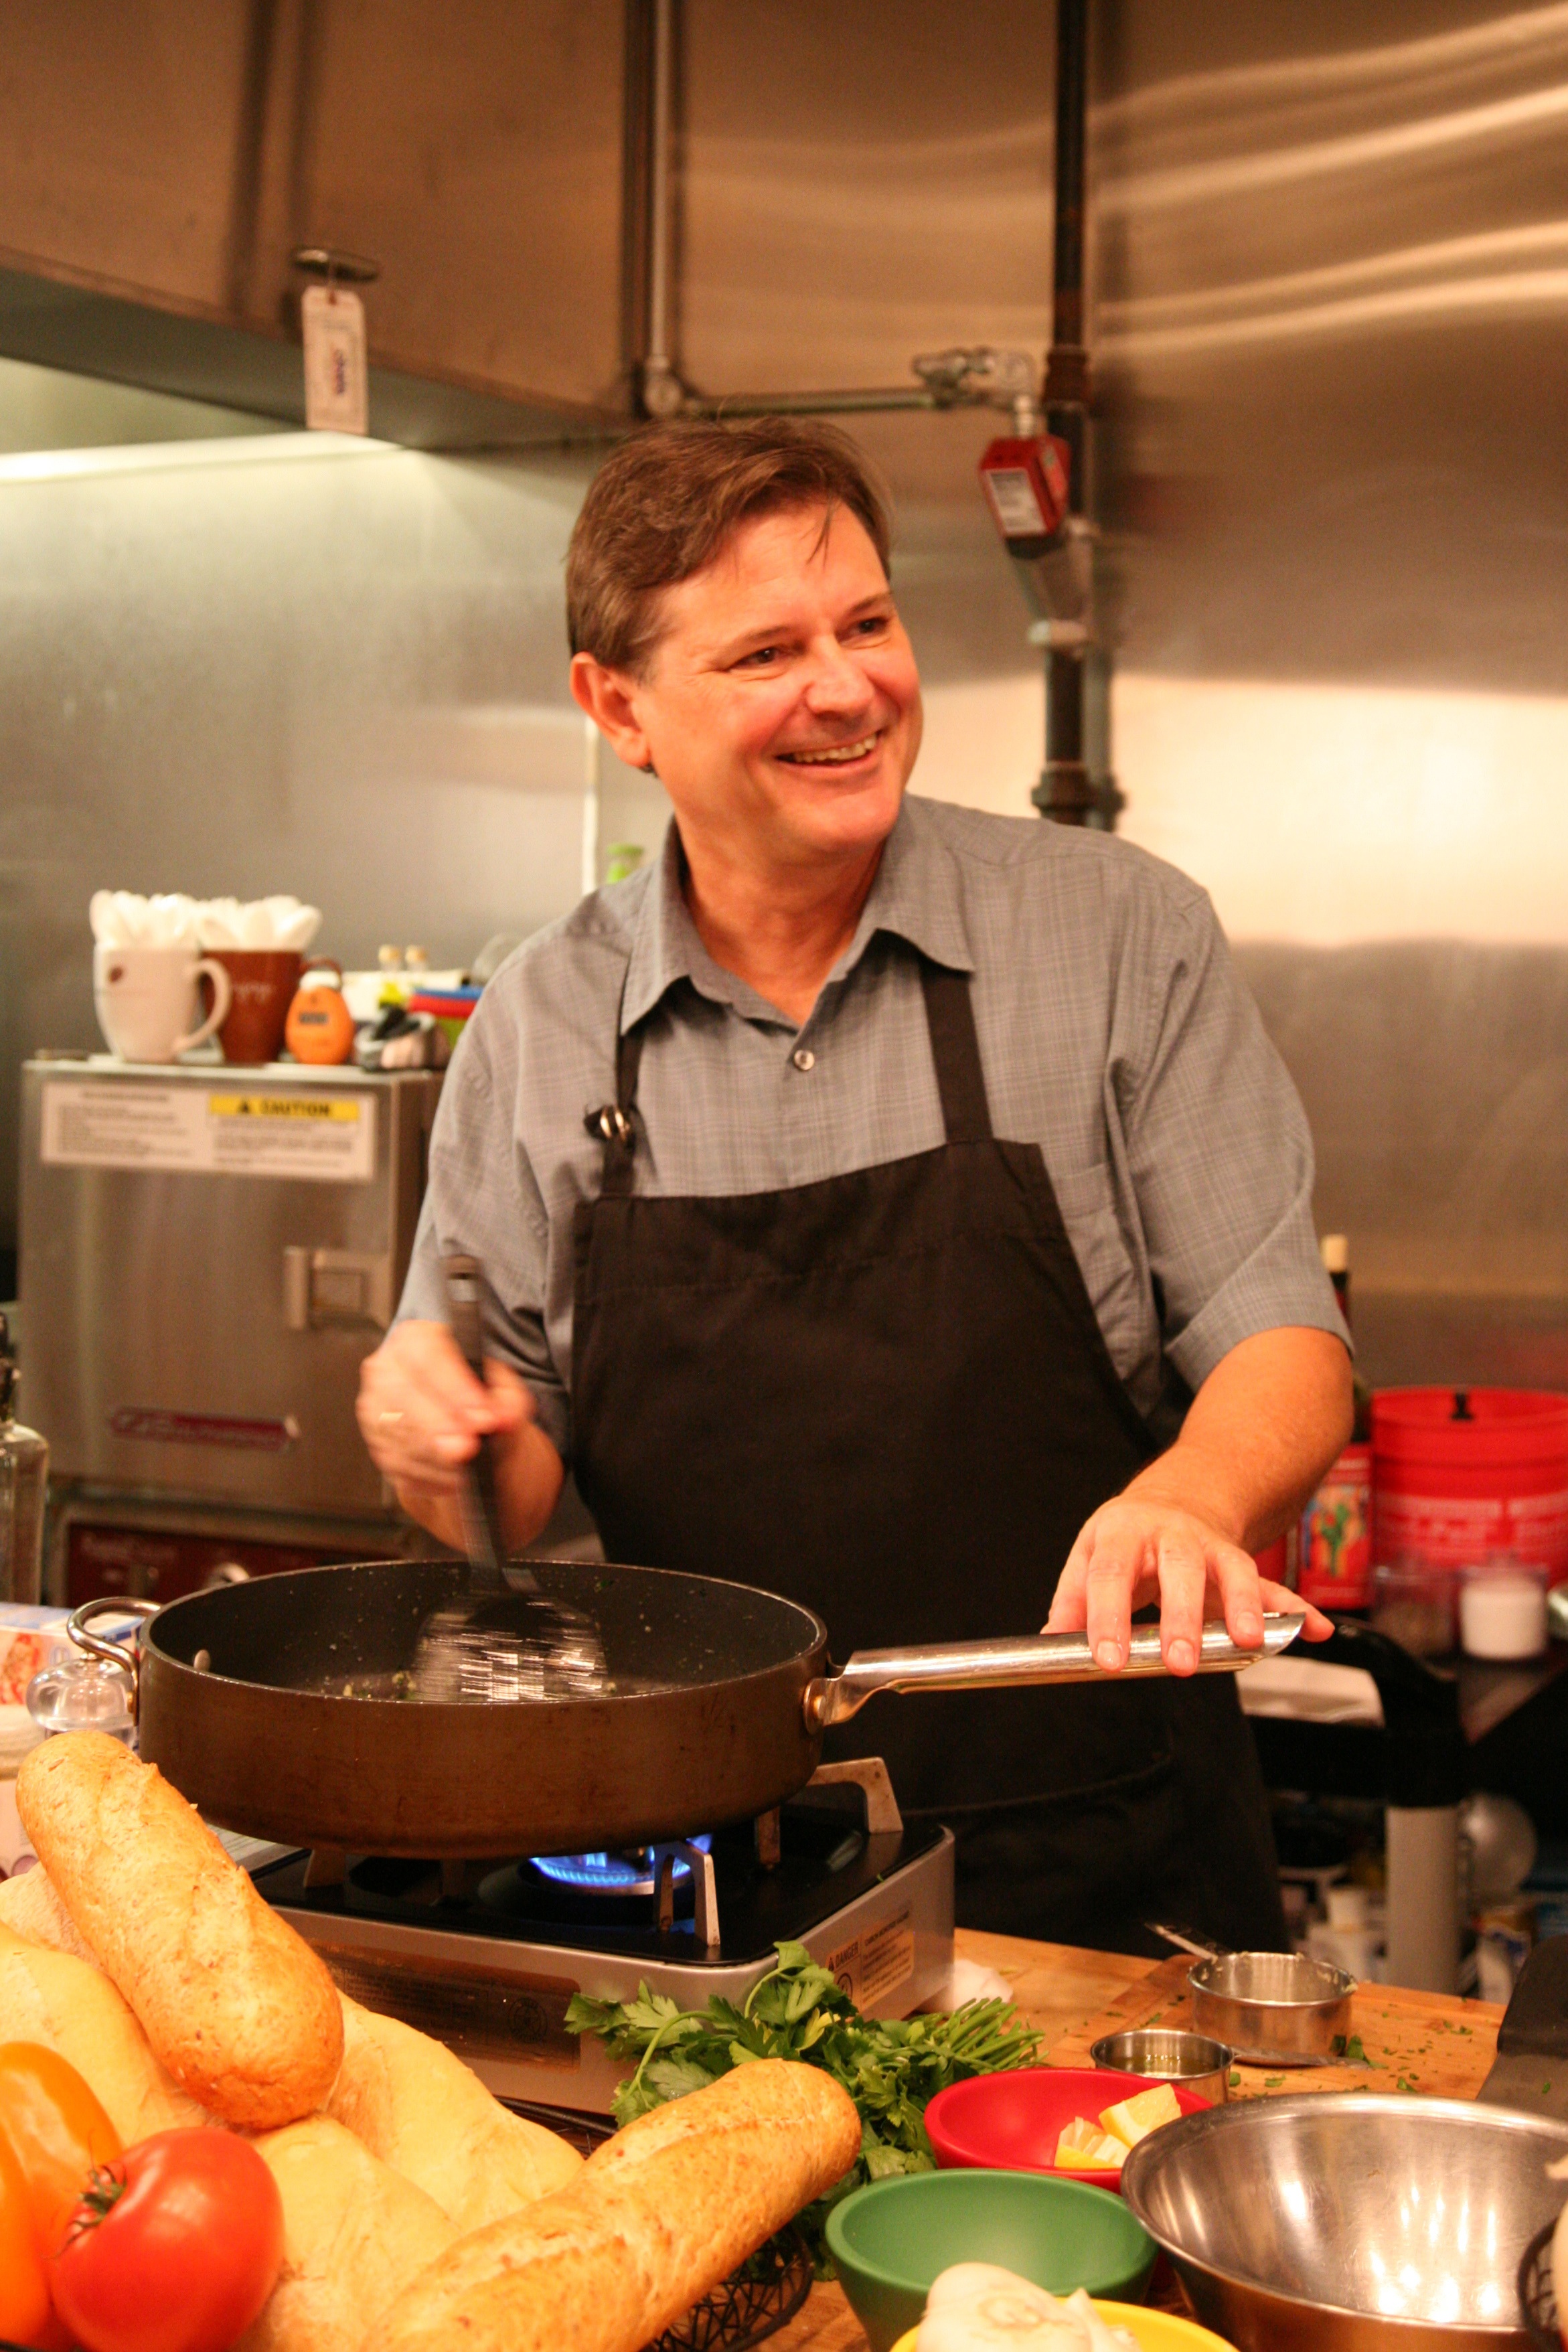 A photo of Chef Warren cooking.